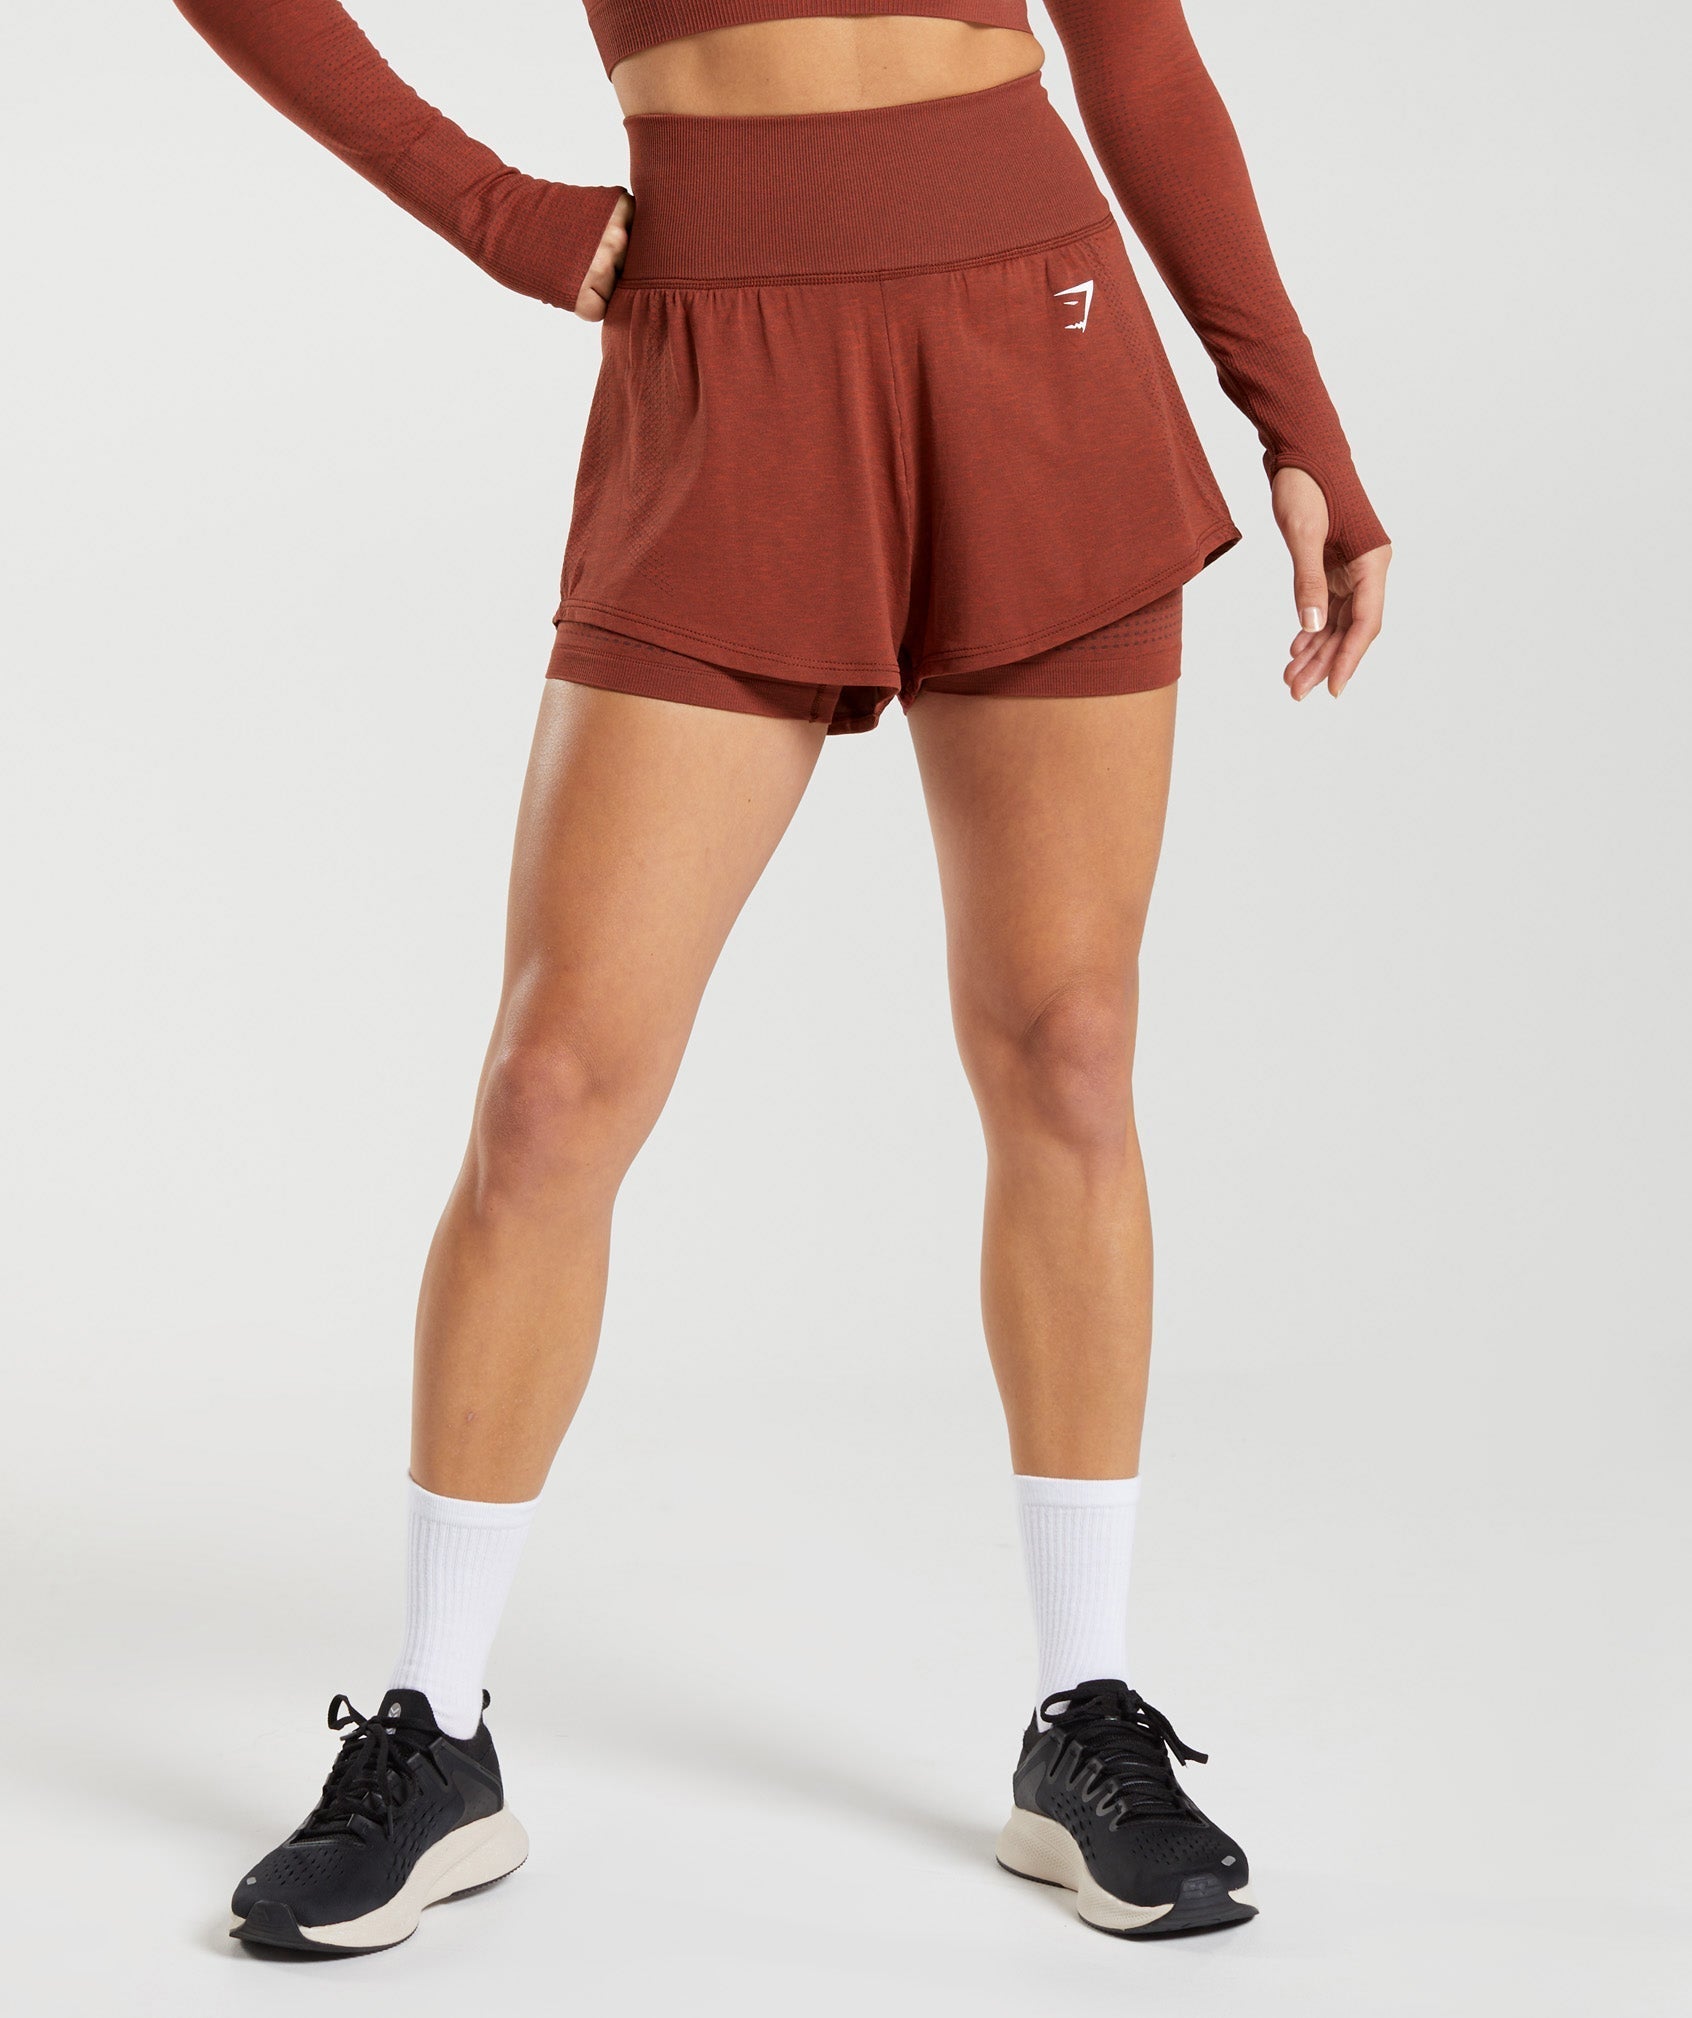 Vital Seamless 2.0 2-in-1 Shorts in {{variantColor} is out of stock